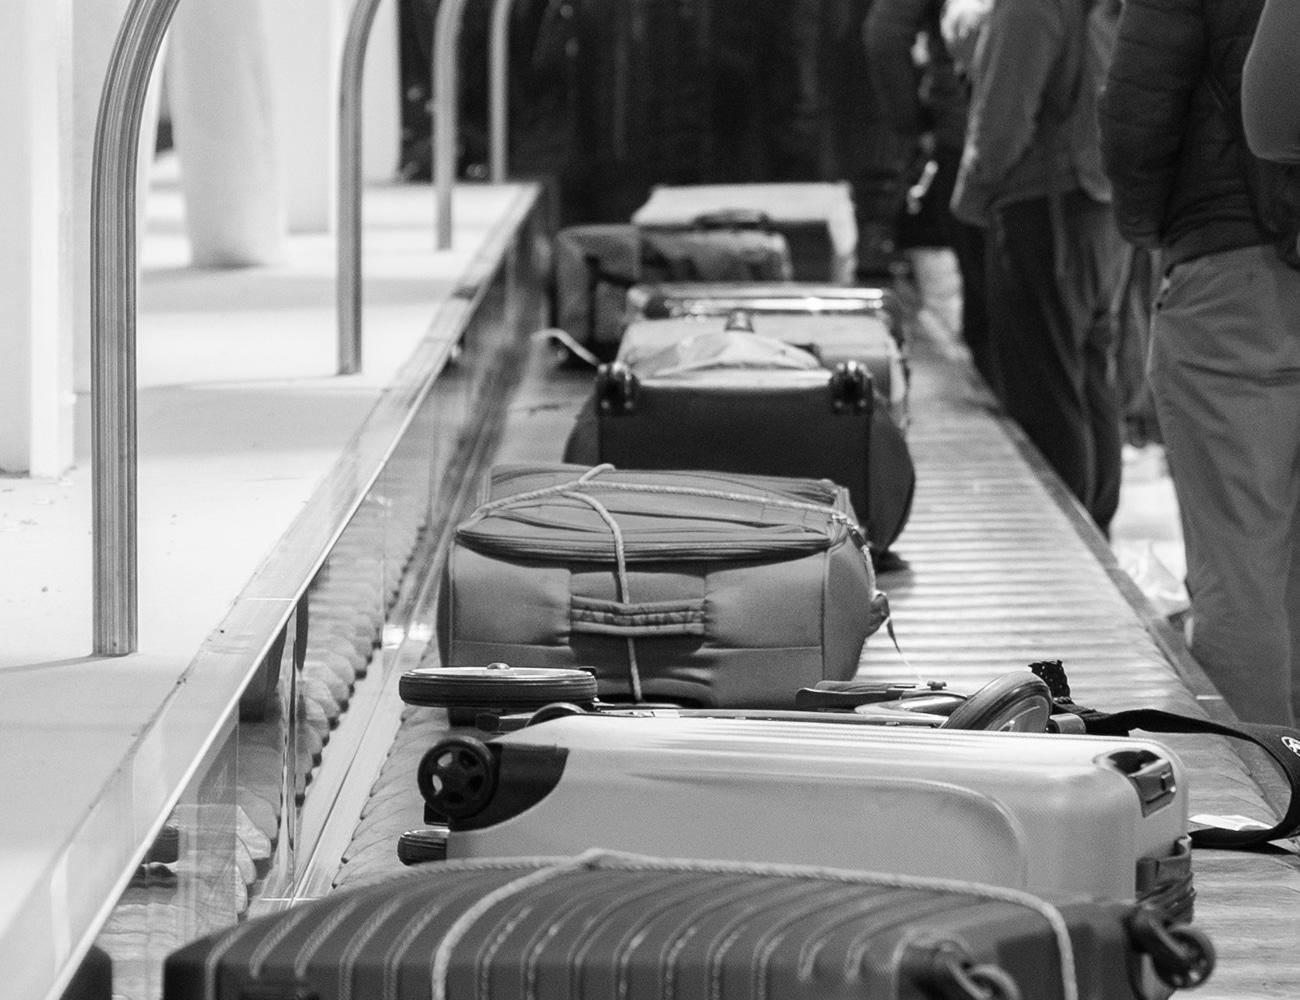 Baggage Check in at an Airport